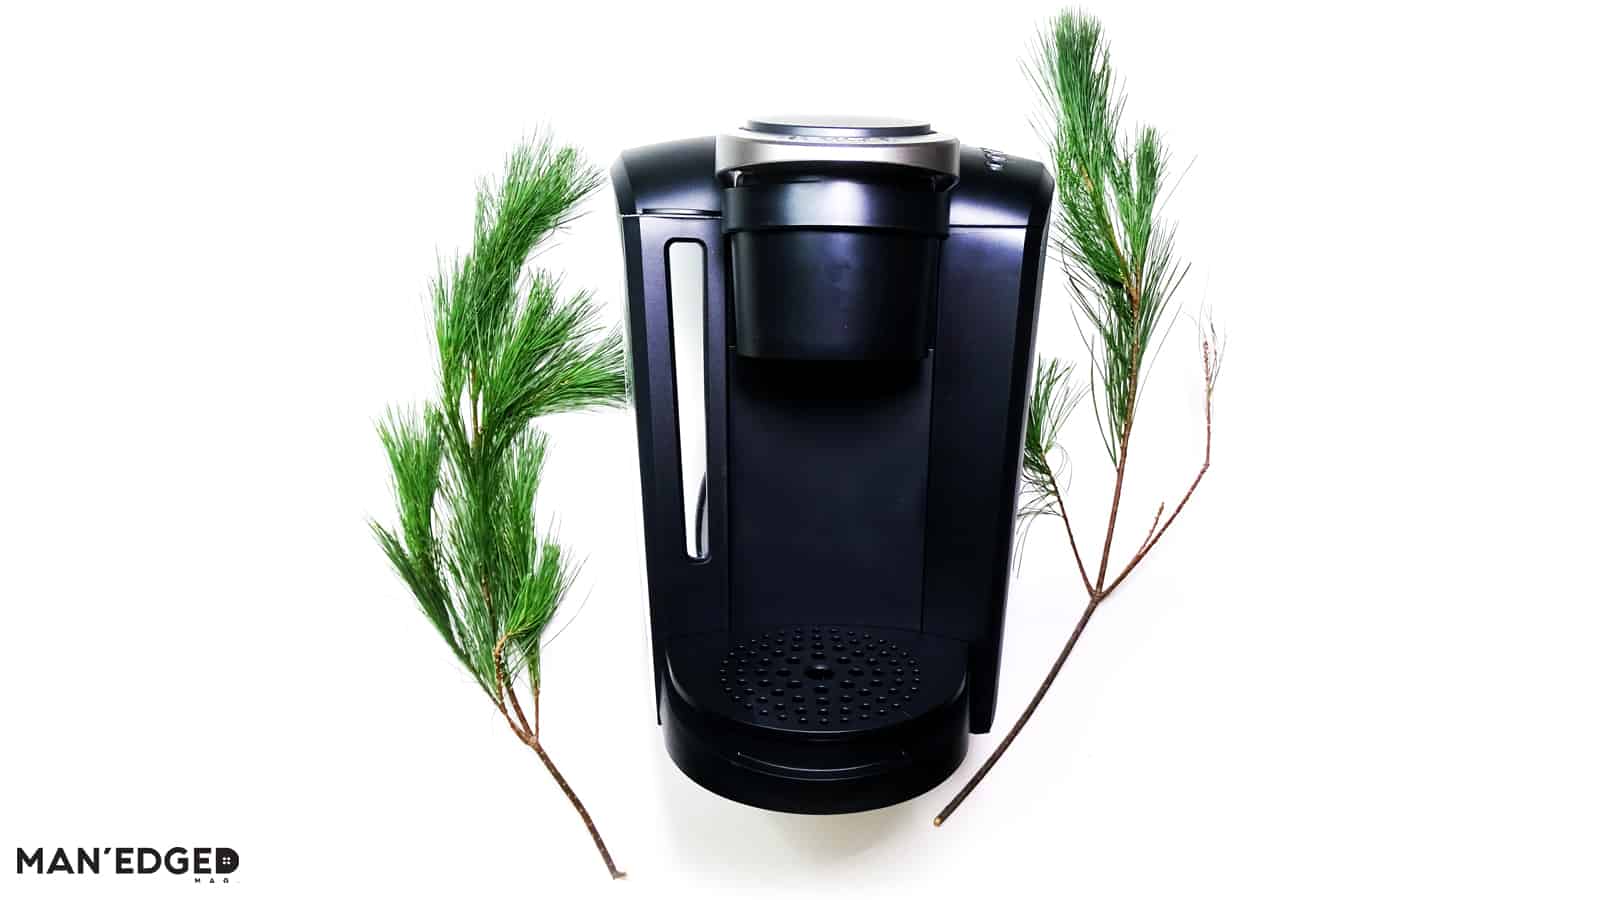 Keurig K Select Coffee Maker featured in gift ideas for the boyfriend or husband